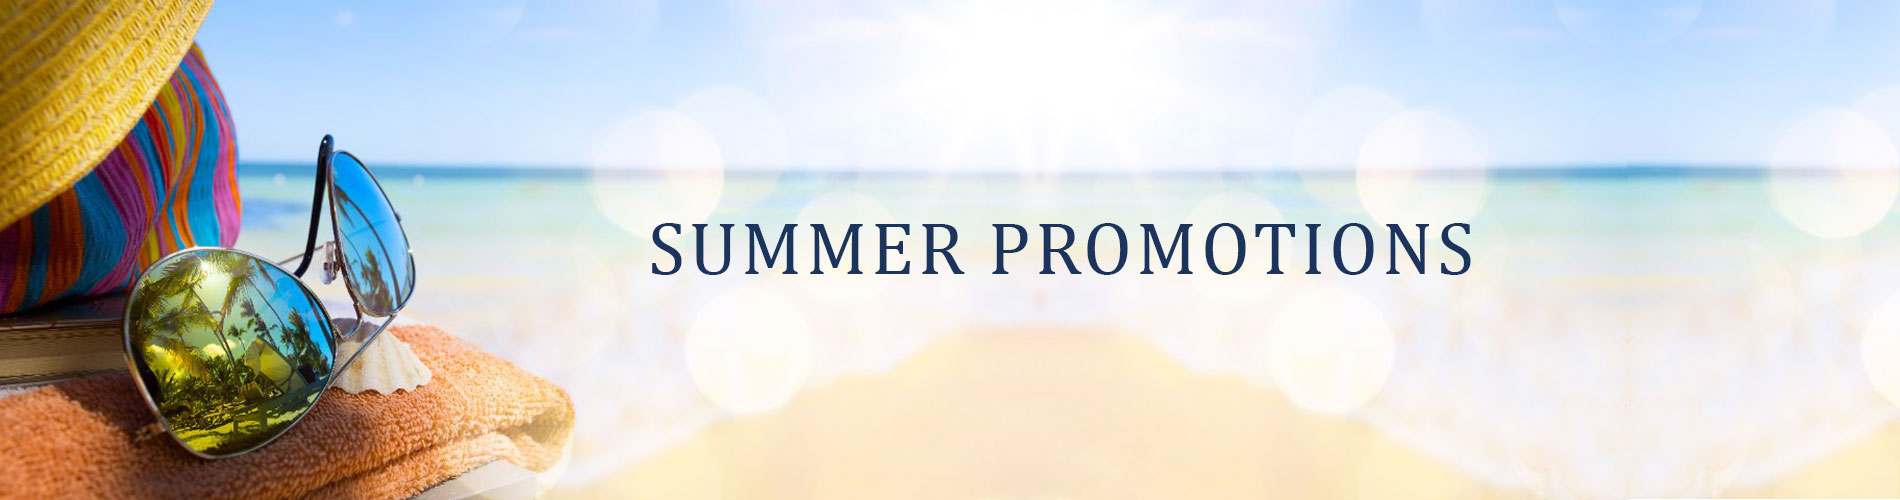 Summer Promotions 1